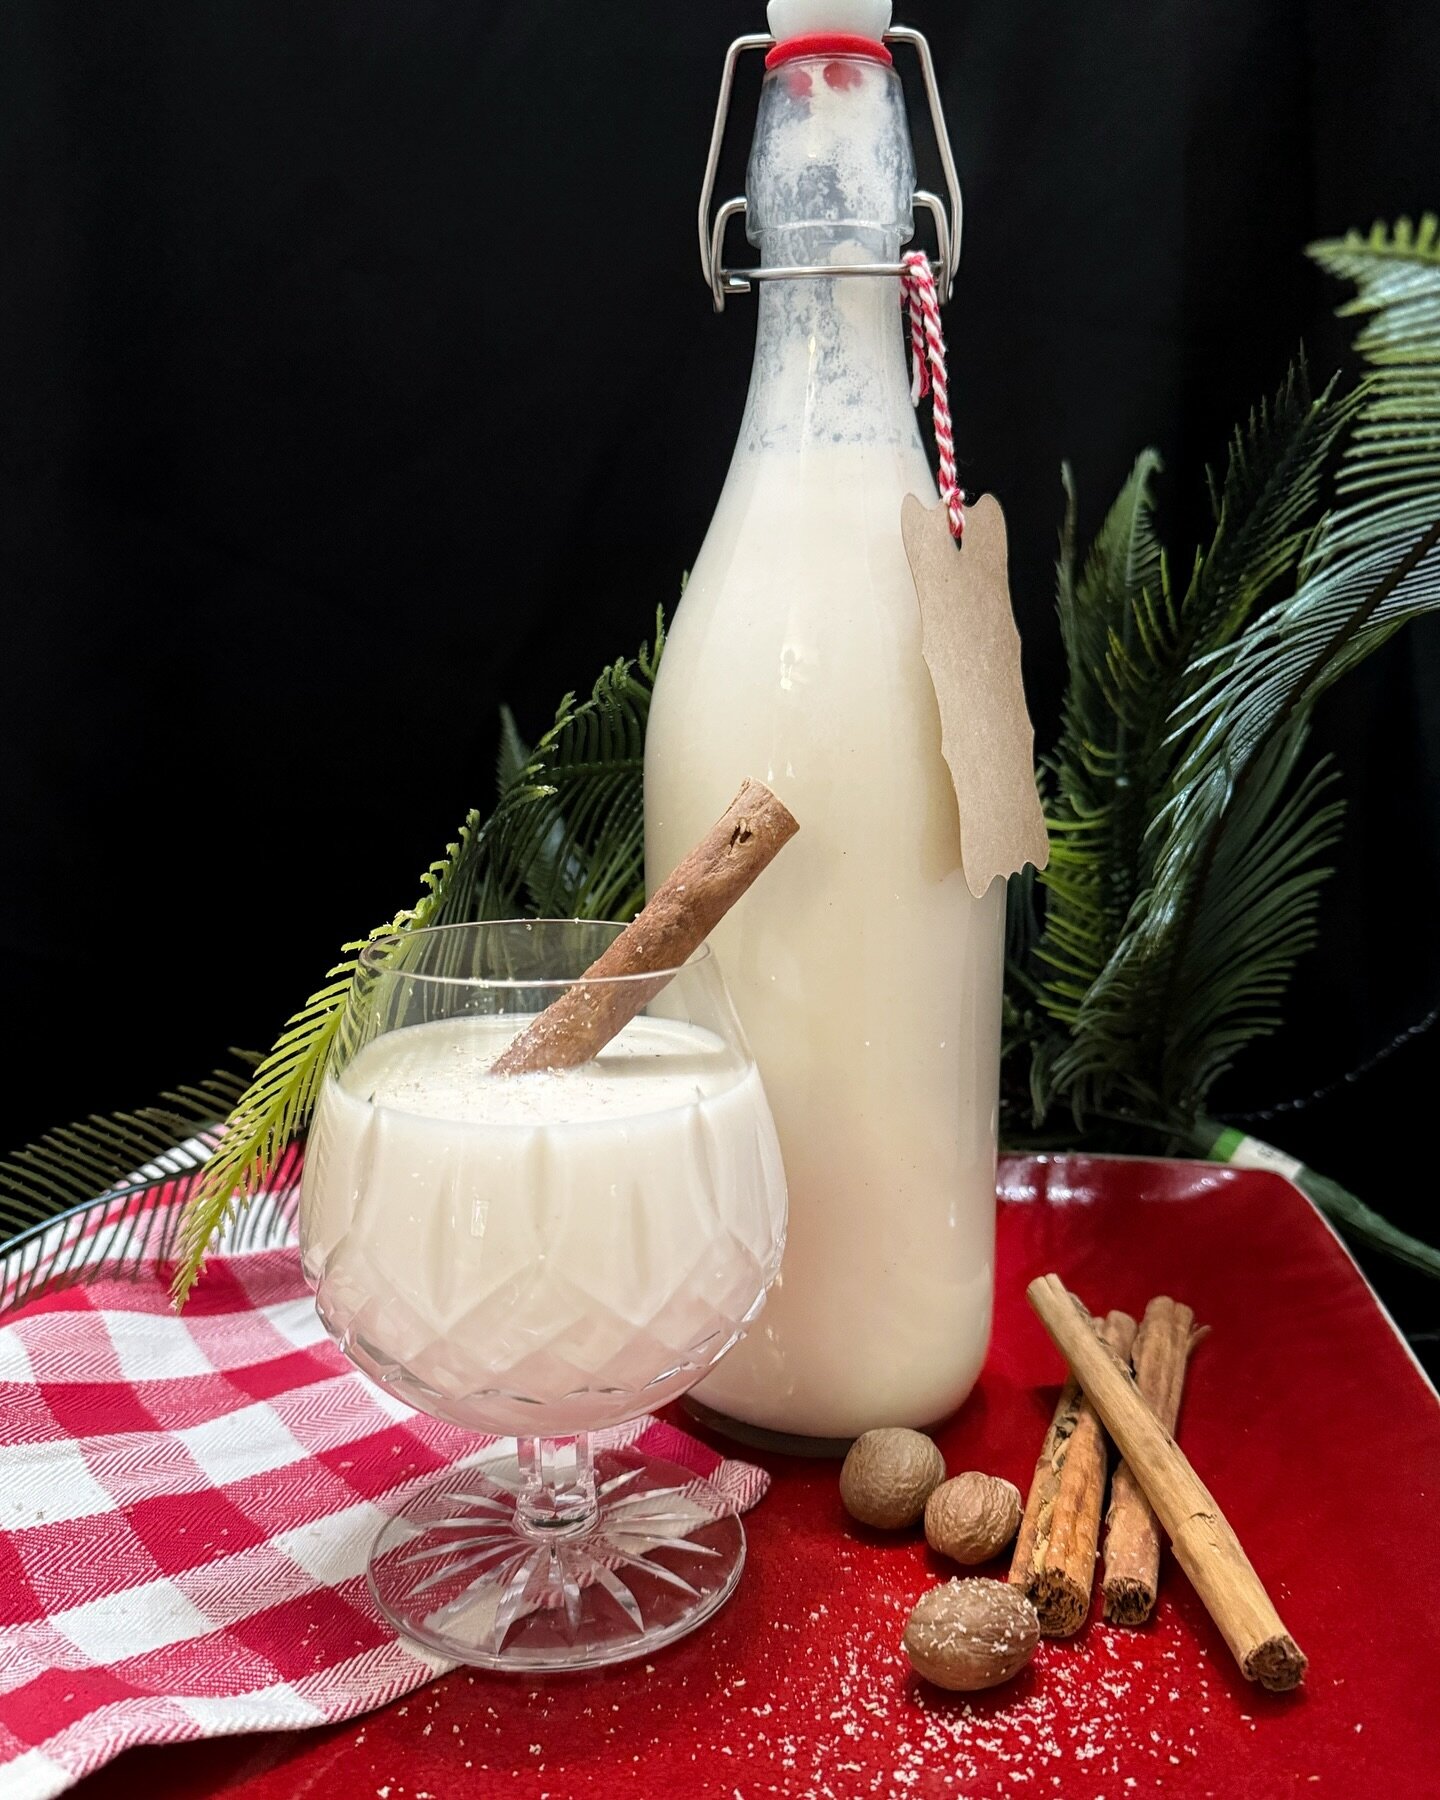 This time of year I get asked: &ldquo;Will you be bringing the Coquito to the party?&rdquo;

For those that are unfamiliar, Coquito is a traditional Puerto Rican Holiday beverage often compared to egg nog, although they really have very little in com